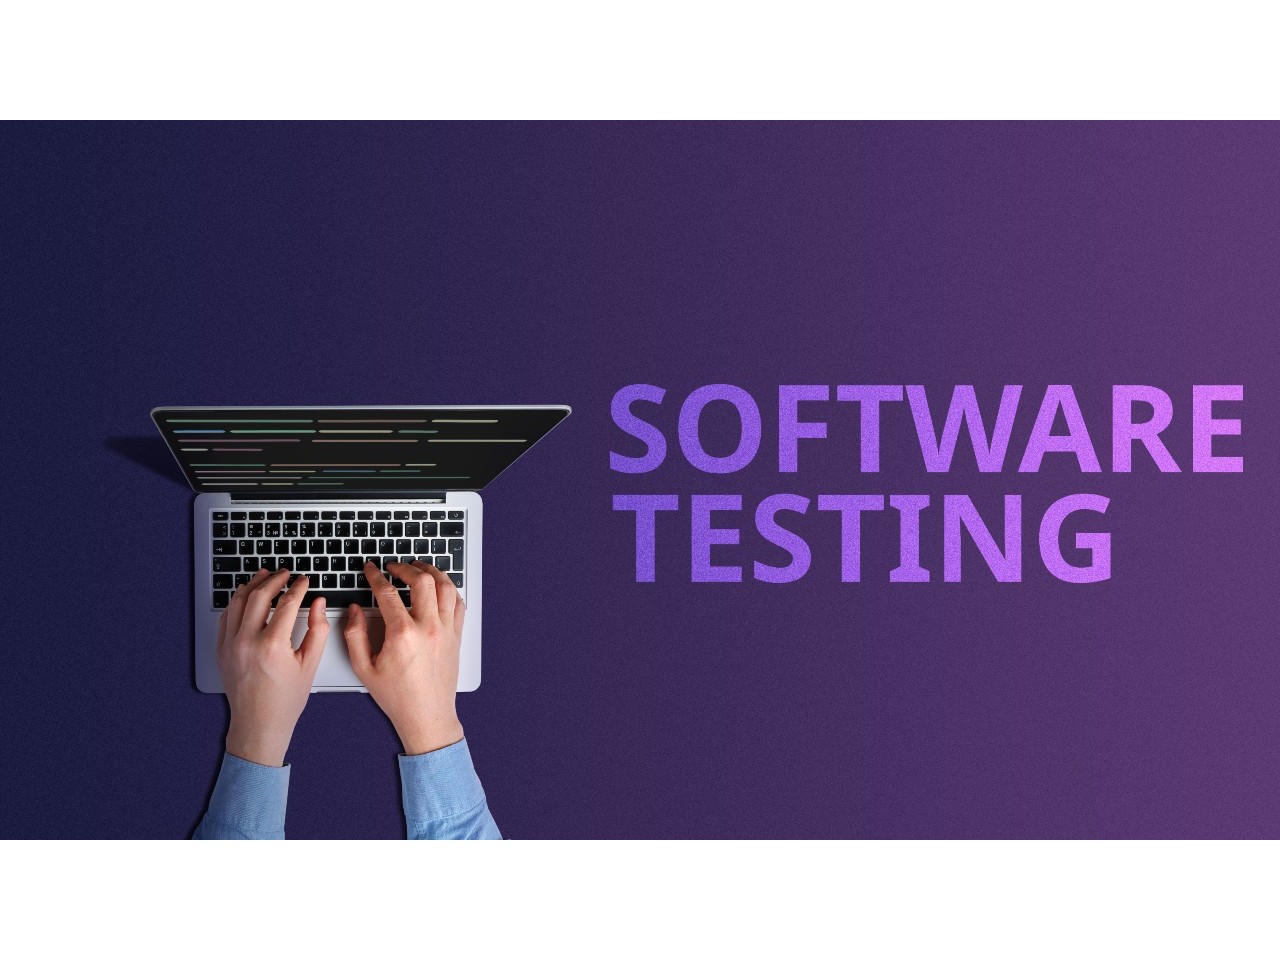 Software testing is growing in importance